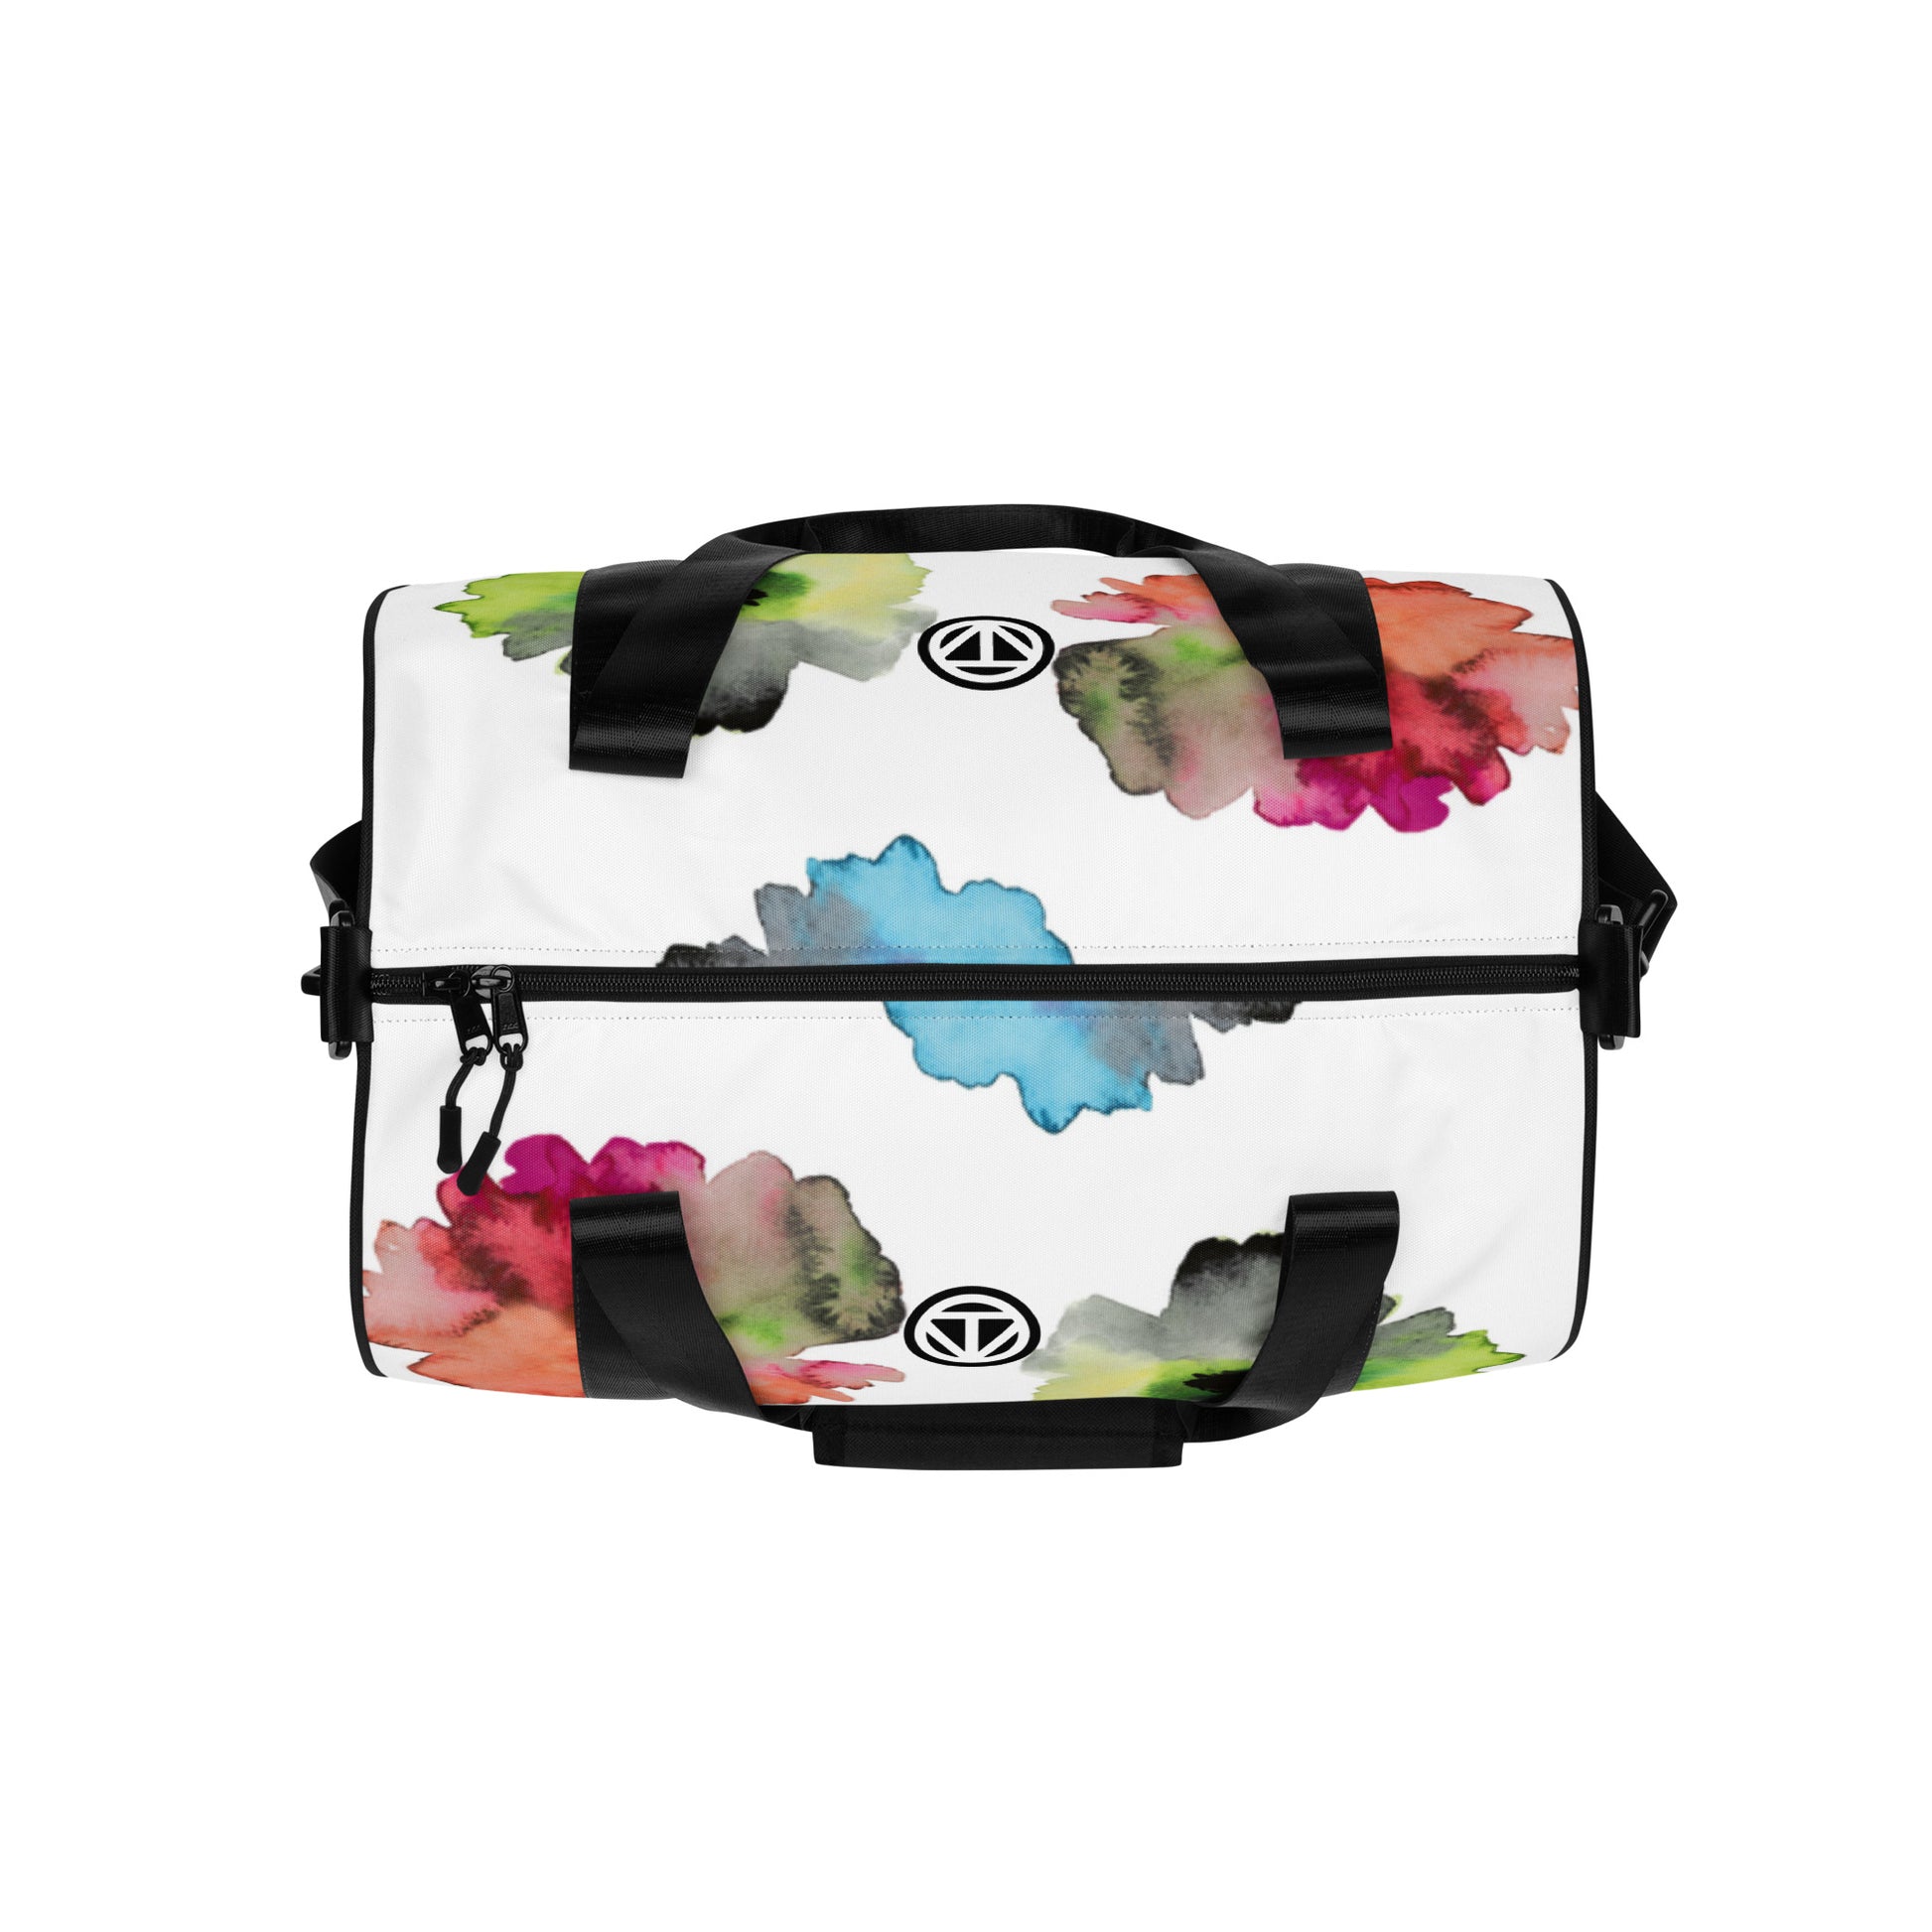 TIME OF VIBES - Sports Bag 23 FLOWER - €85.00